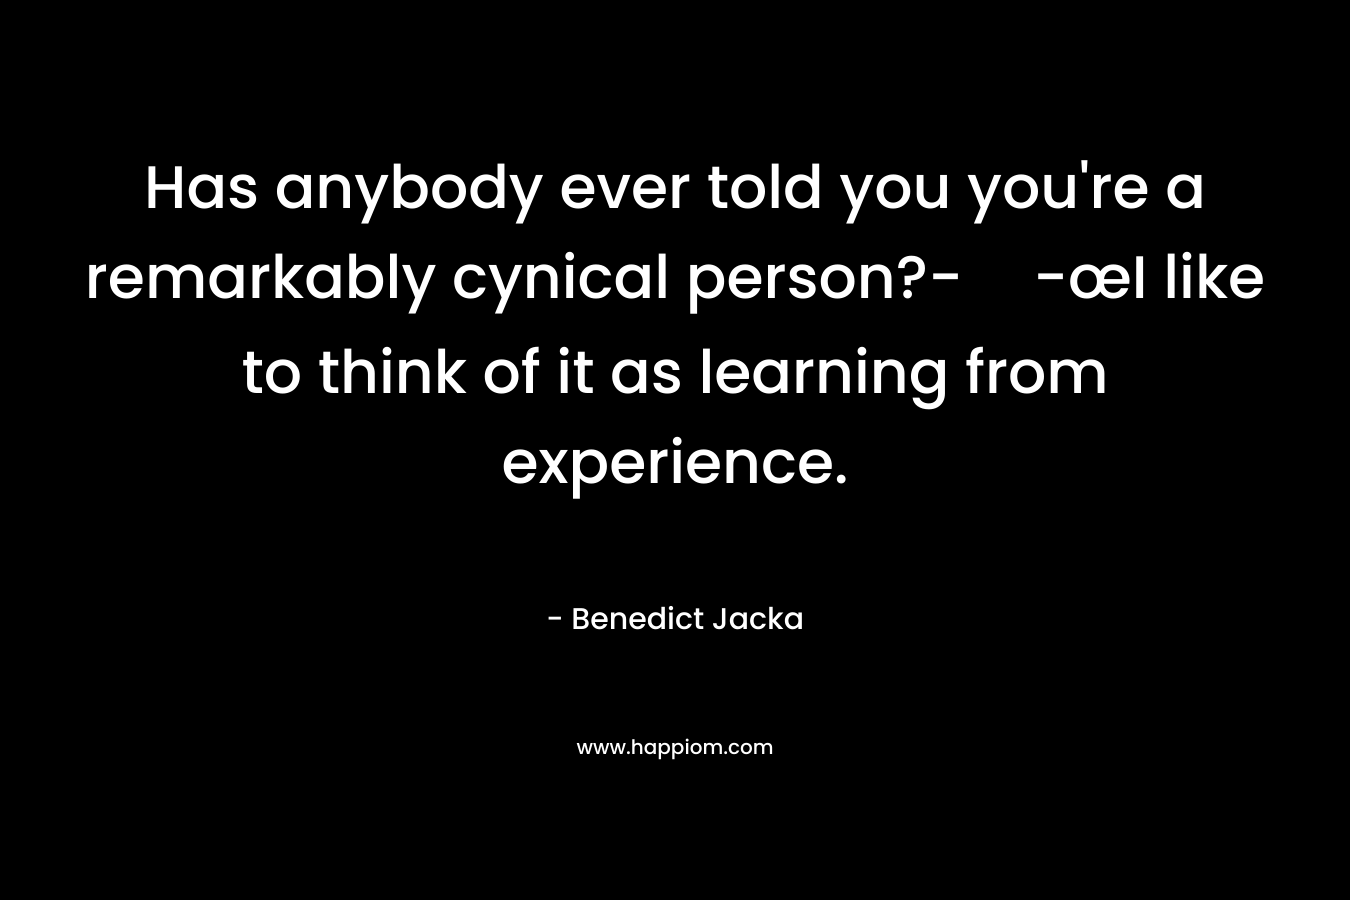 Has anybody ever told you you're a remarkably cynical person?--œI like to think of it as learning from experience.